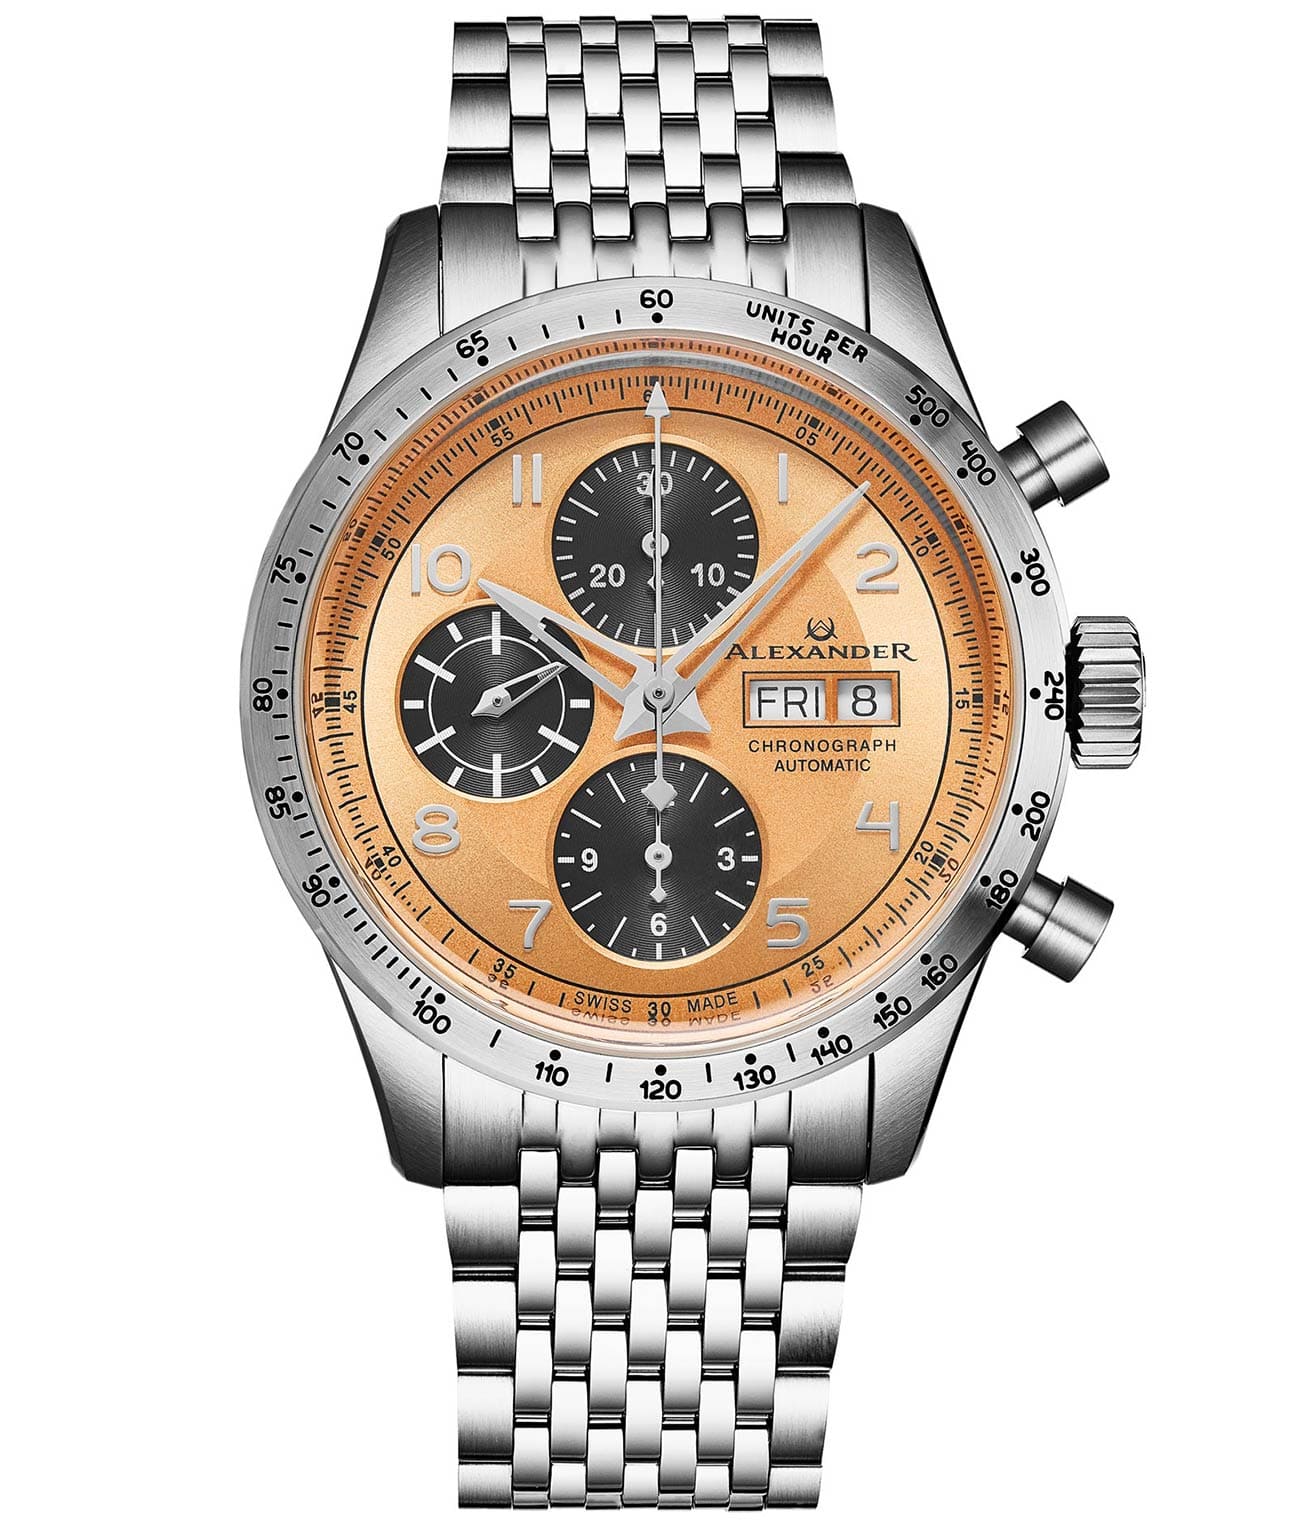 Swiss Made Limited Edition (SW500) Chronograph